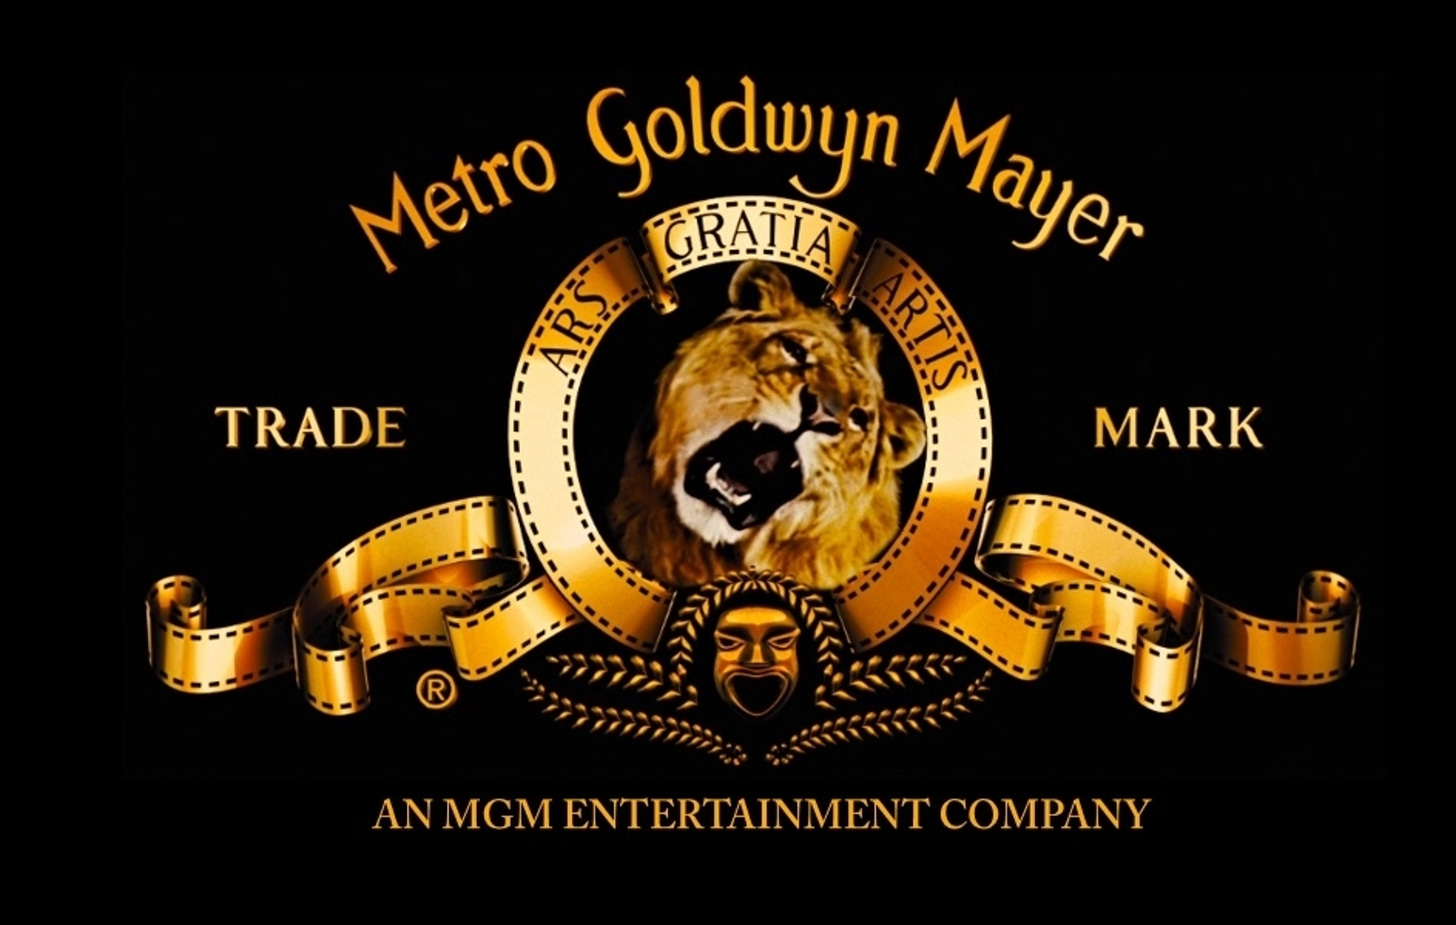 MGM's iconic lion mascot has been replaced by an all-CGI version